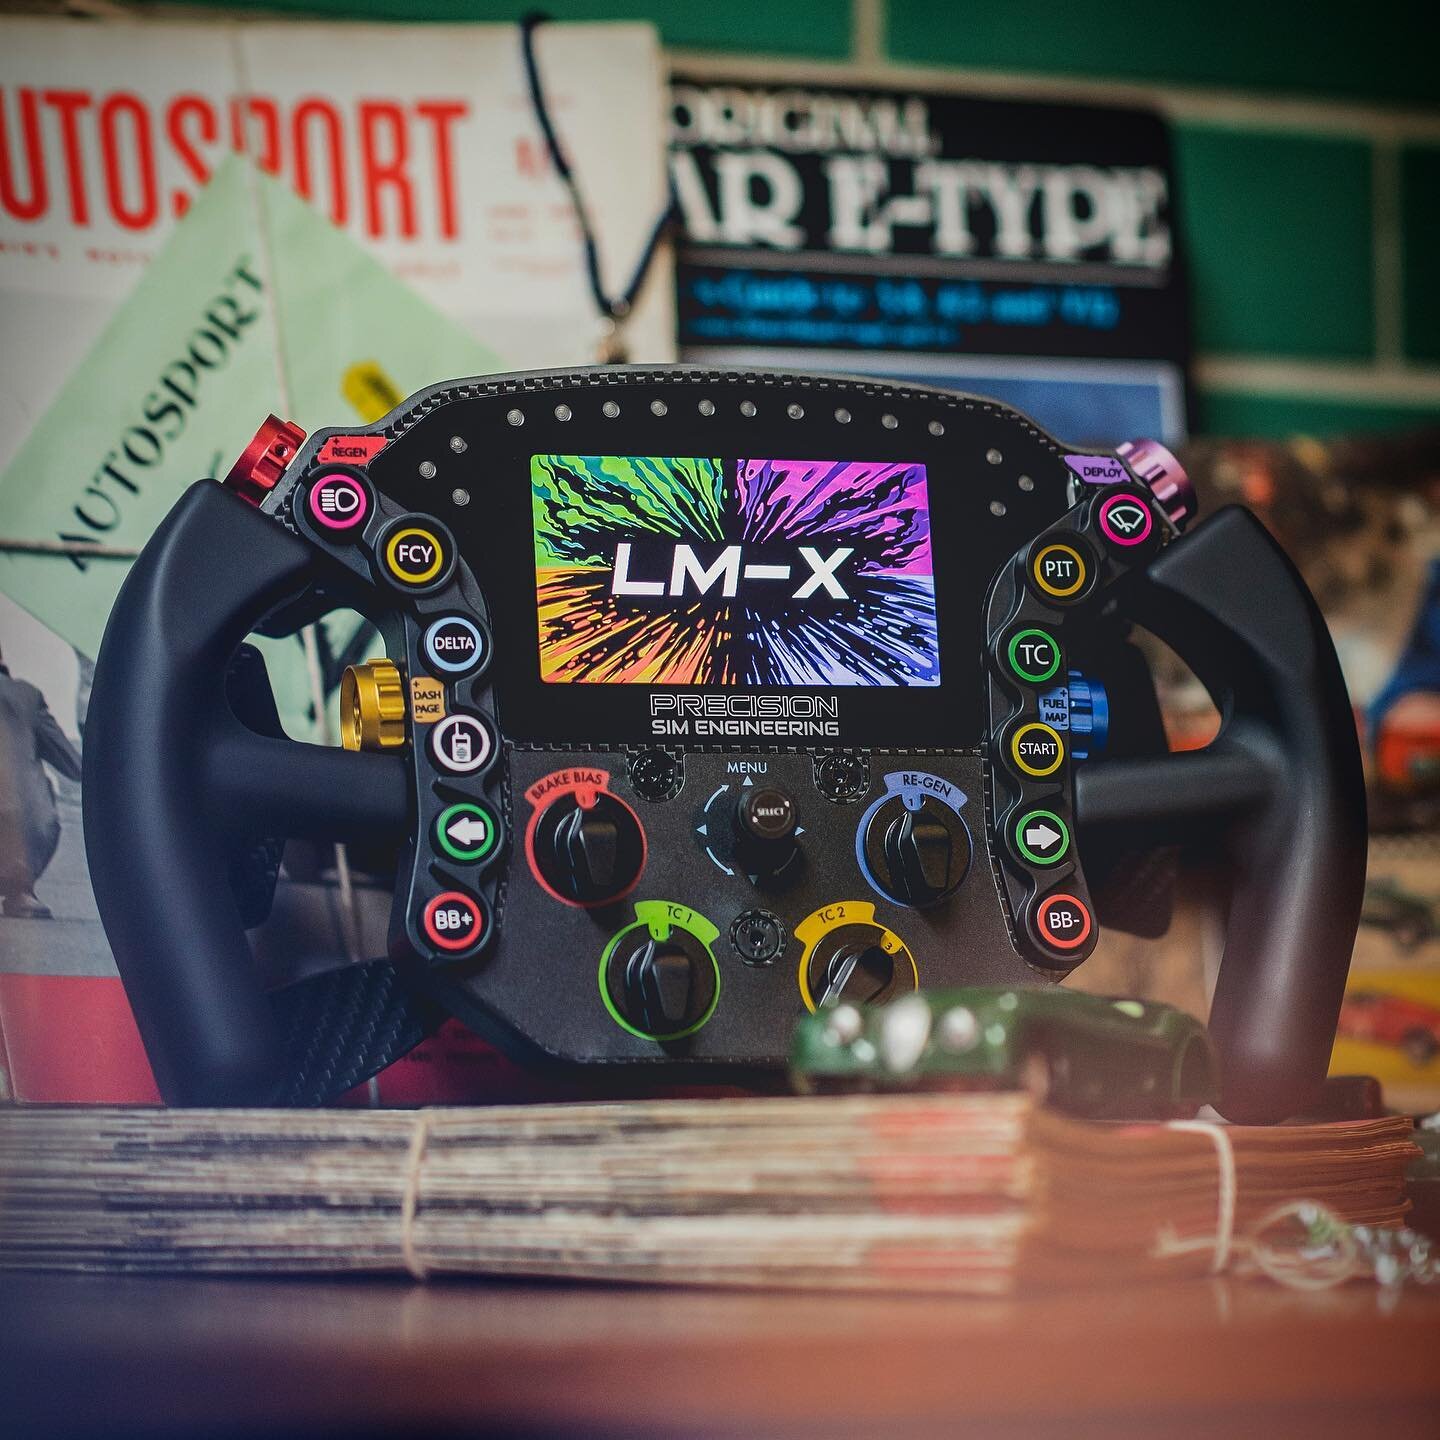 LM-X: Putting you in control...

Featuring our famous Snap-Action Gear Shifters as standard.

Optional Quick-Adjust Paddles for added flexibility.

Optional Dual-Clutch system with Electronic Launch Control for the perfect getaway.

Shape your experi